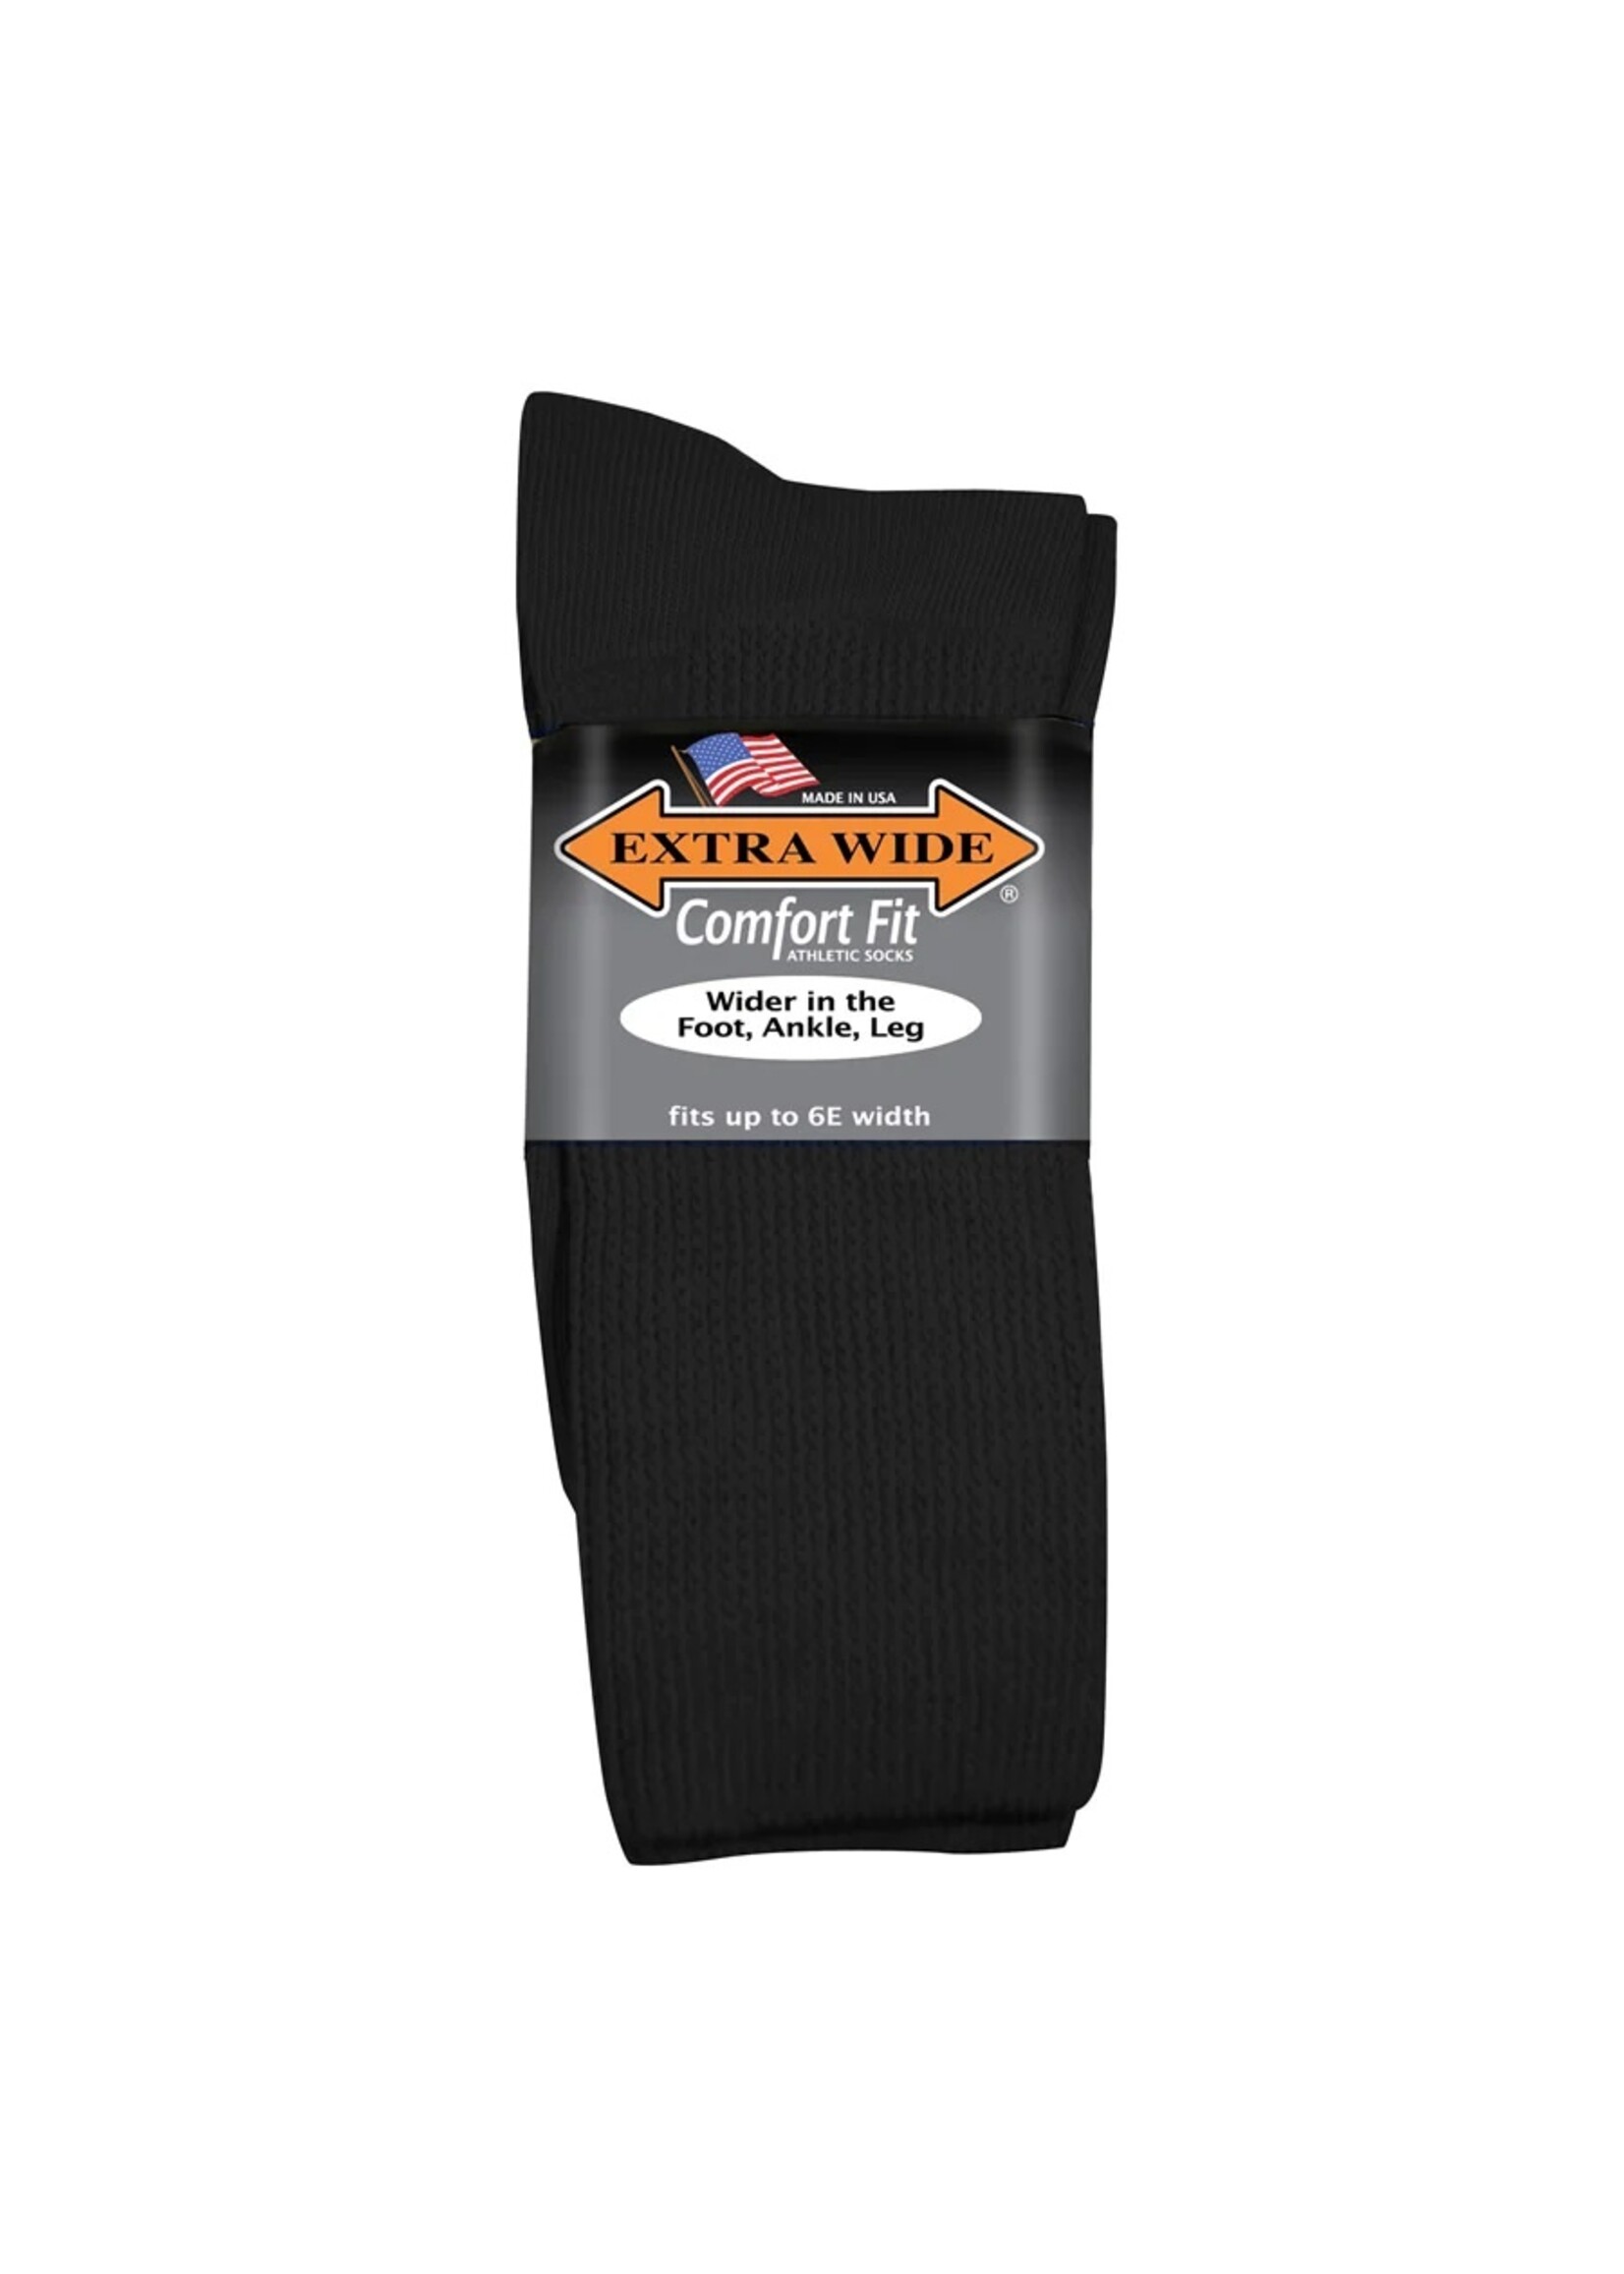 Extra Wide Sock Company Comfort fit Athletic Socks Crew Small Black #6001